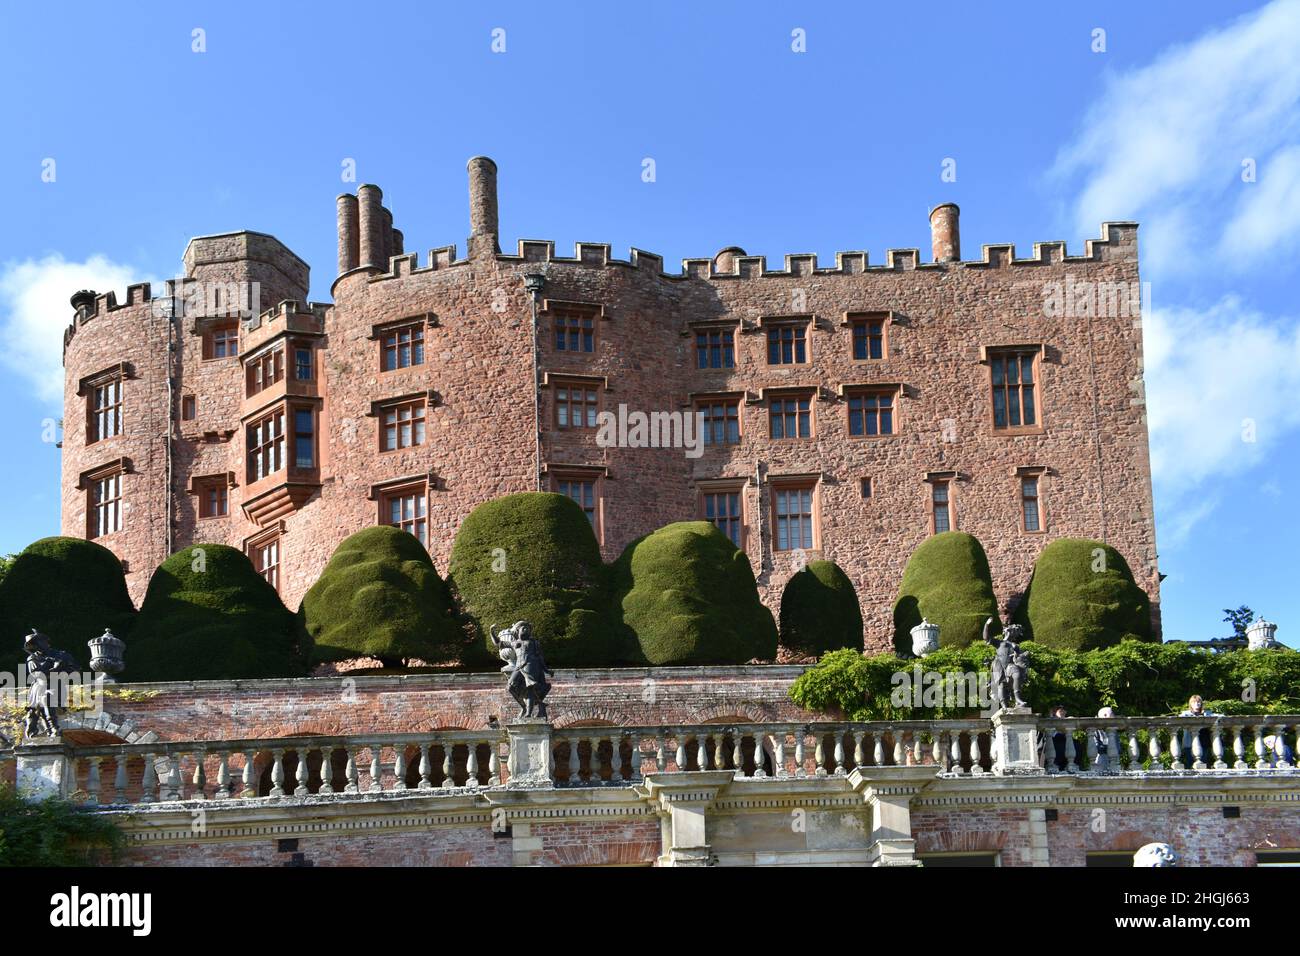 close up of Powys castle, Wales on a glorious summers day with deep blue sky background Stock Photo